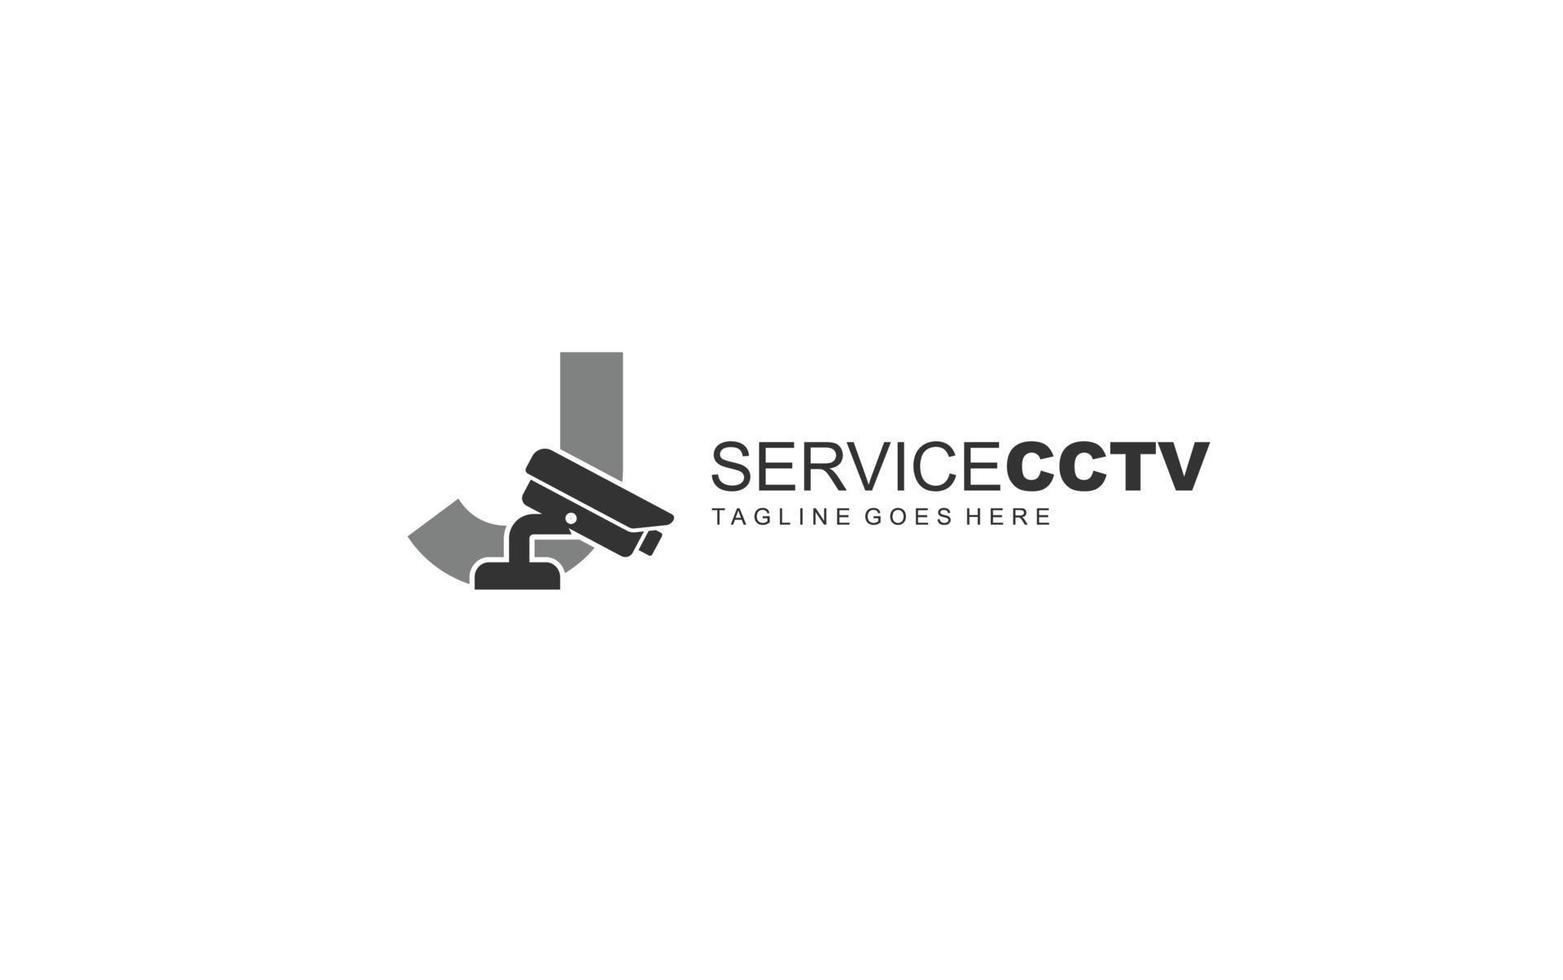 J logo cctv for identity. security template vector illustration for your brand.